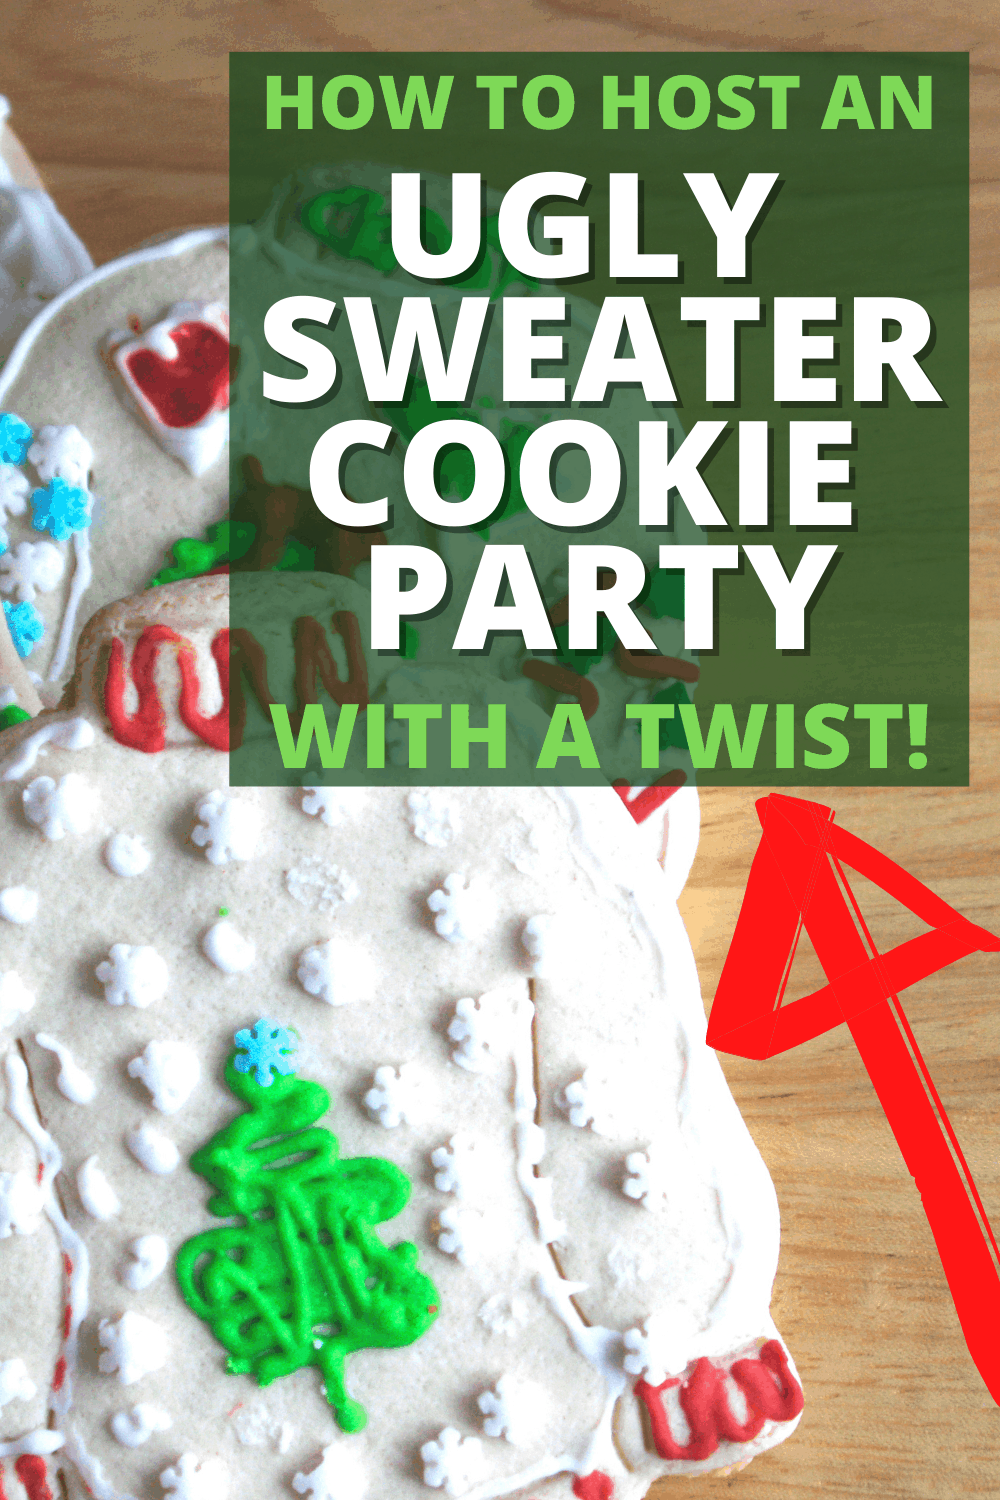 Ugly Sweater Cookie Decorating Party (how to host a cookie baking party)